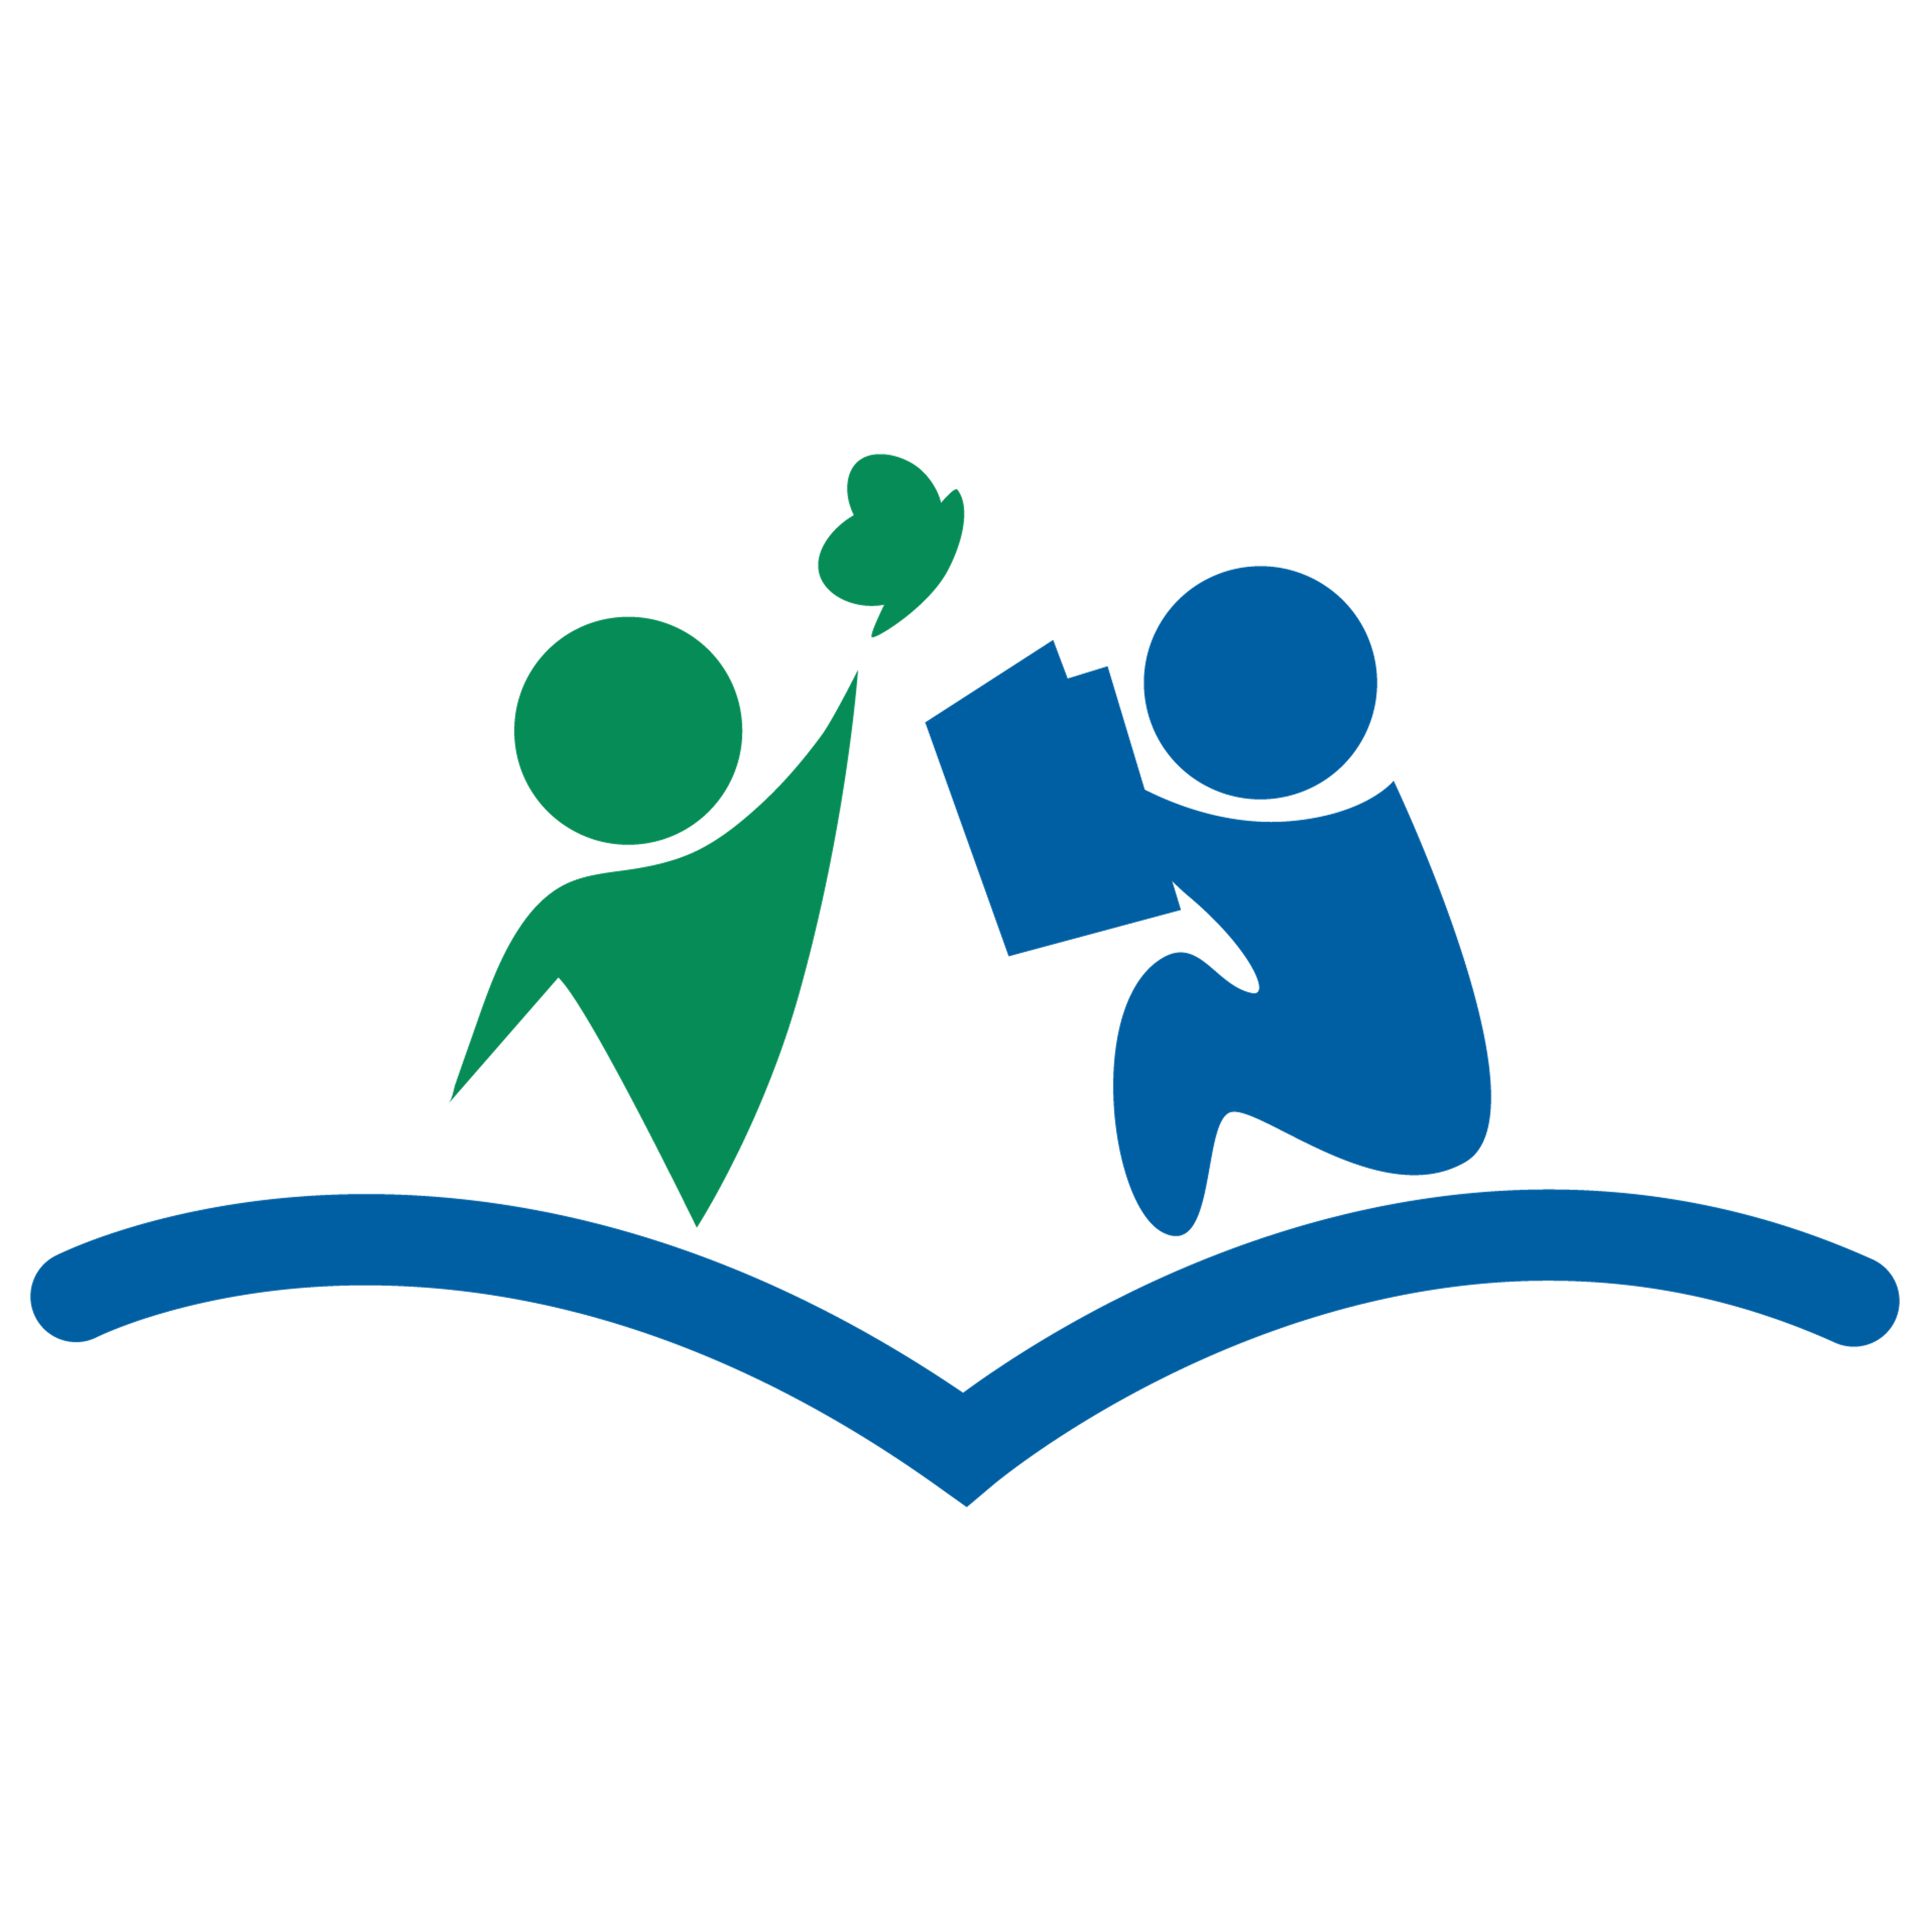 Children Discovering Their World Logo: Illustration of a child reaching for a butterfly and another child reading